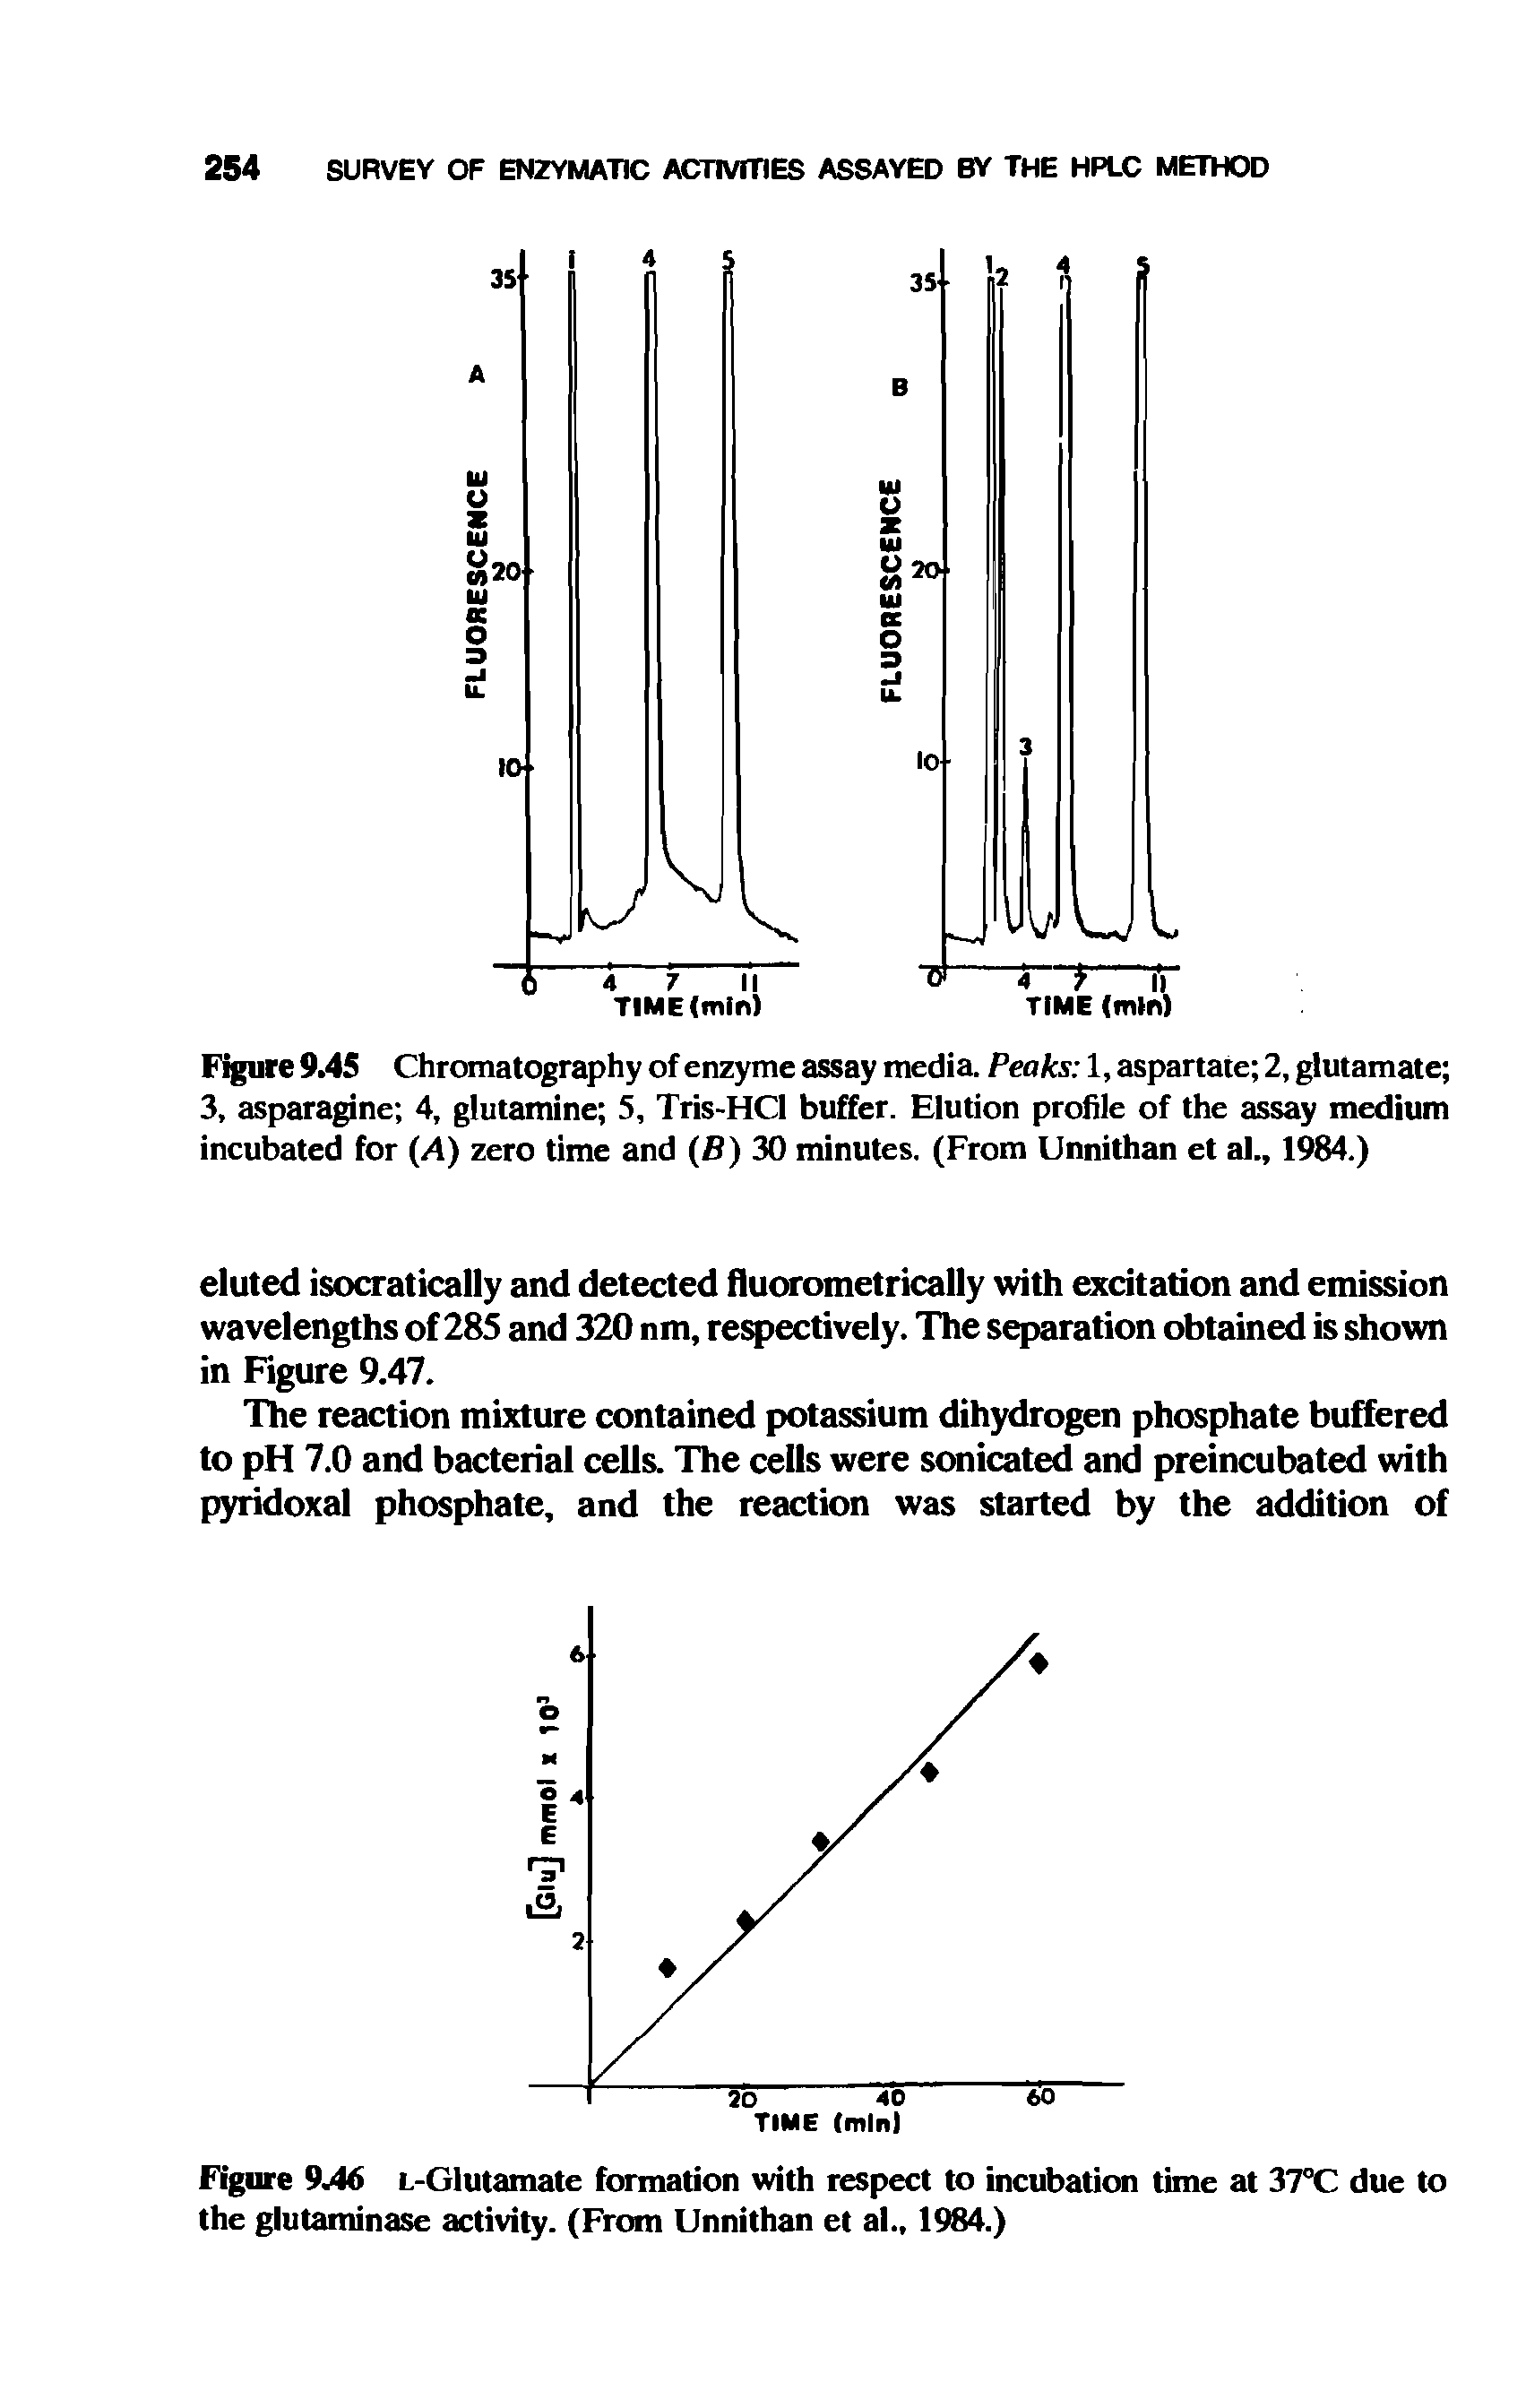 Figure 9.45 Chromatography of enzyme assay media. Peaks 1, aspartate 2, glutamate 3, asparagine 4, glutamine 5, Tris-HCl buffer. Elution profile of the assay medium incubated for (A) zero time and (fl) 30 minutes. (From Unnithan et al., 1984.)...